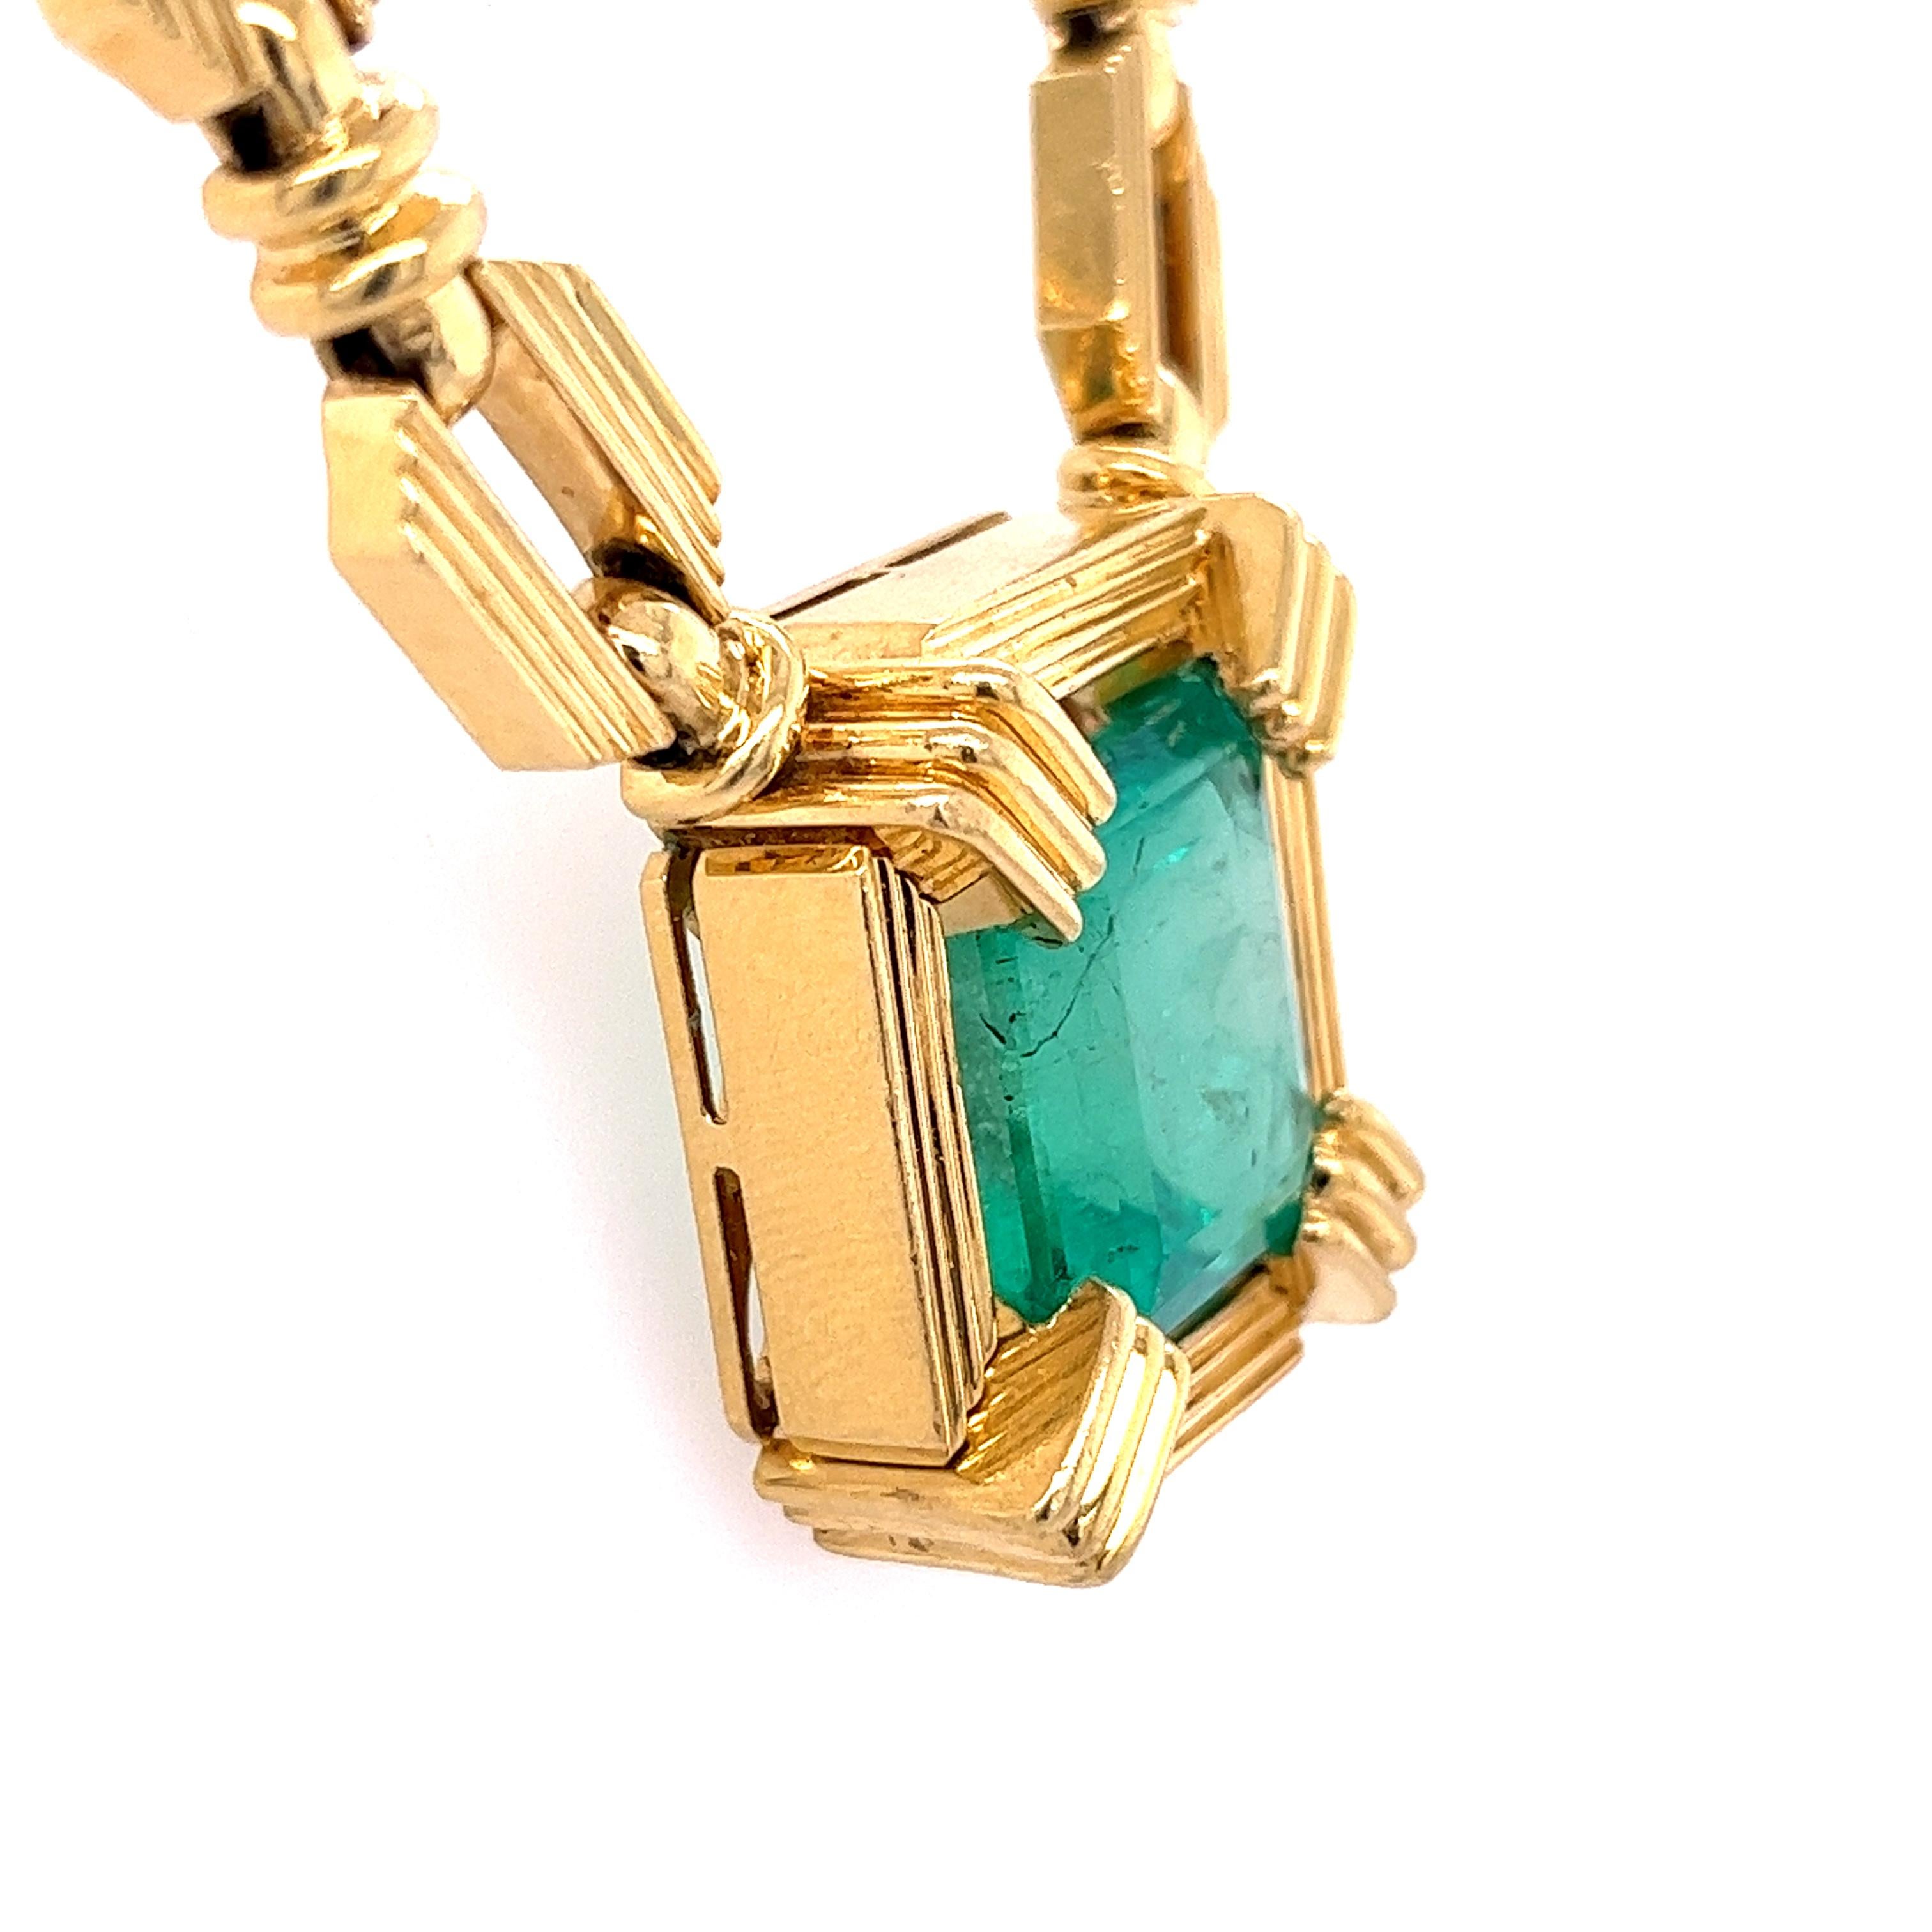 Henry Dunay Signed 19.48 Carat Colombian Emerald Necklace in 18k Yellow Gold In Excellent Condition For Sale In Miami, FL